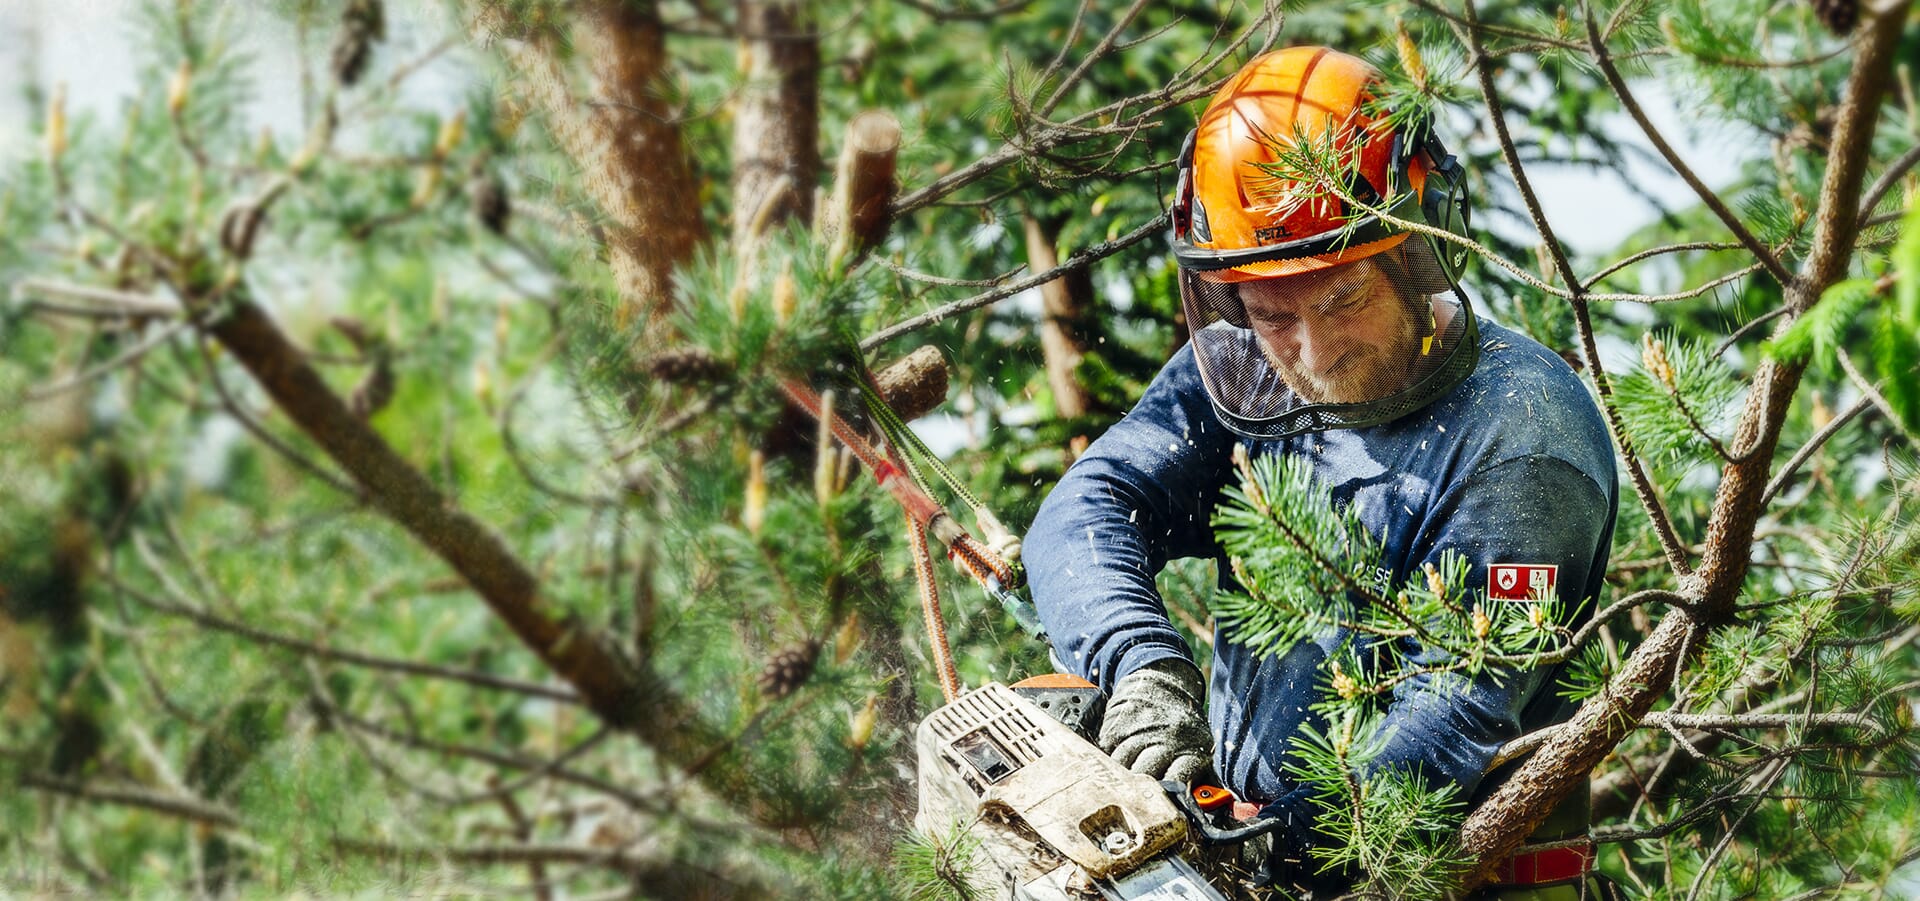 Top Web Design Companies for Tree Service in Oakland